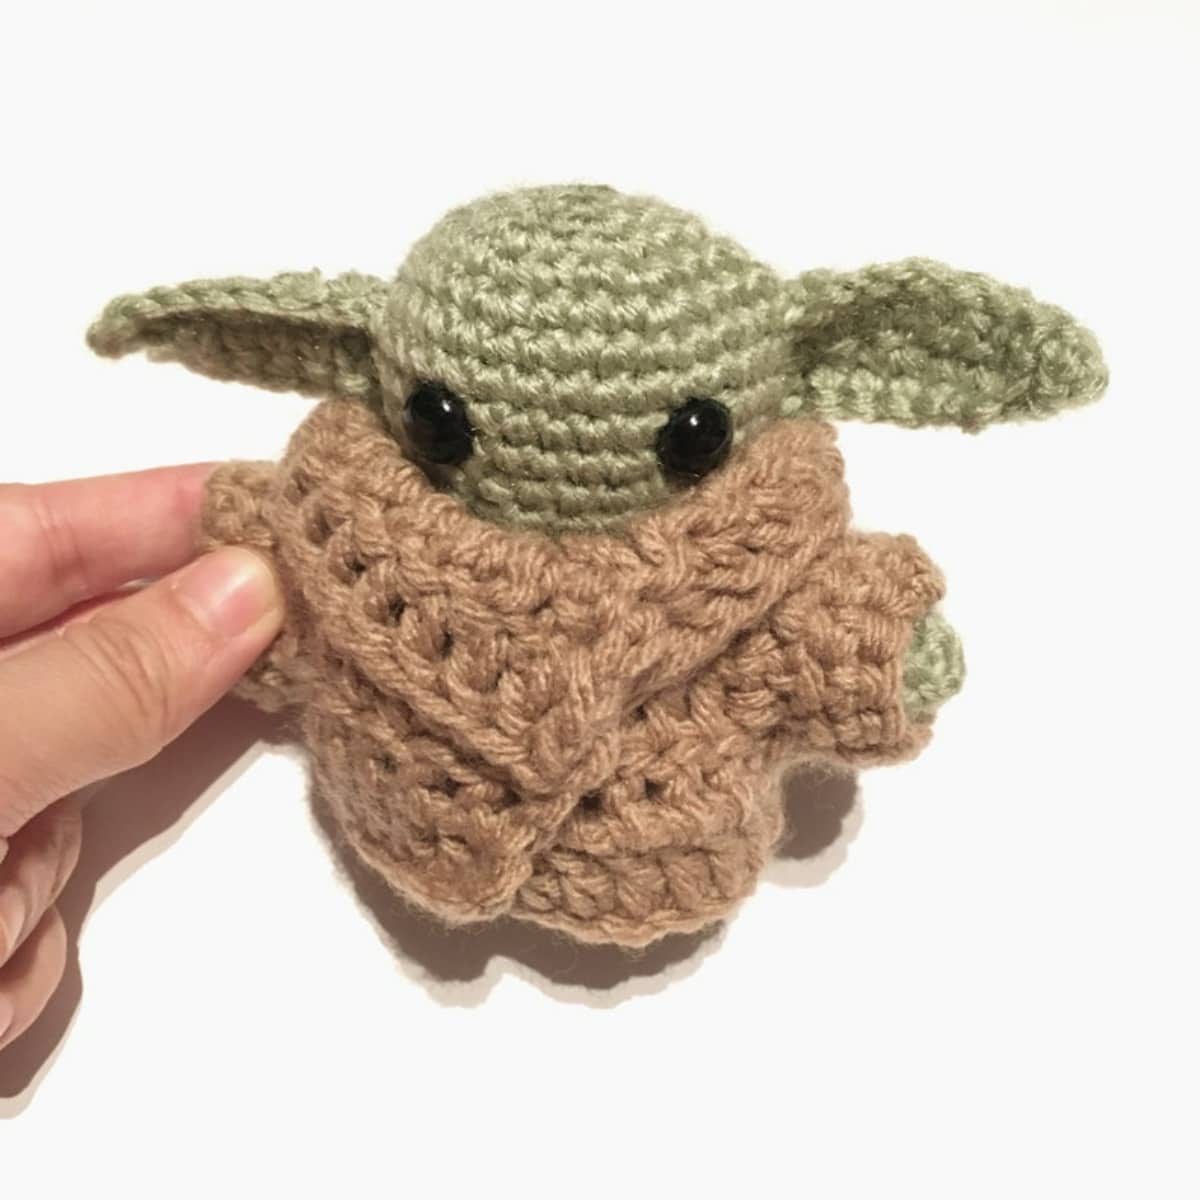 Small crochet baby Yoda in a brown robe held by a hand on a white background.